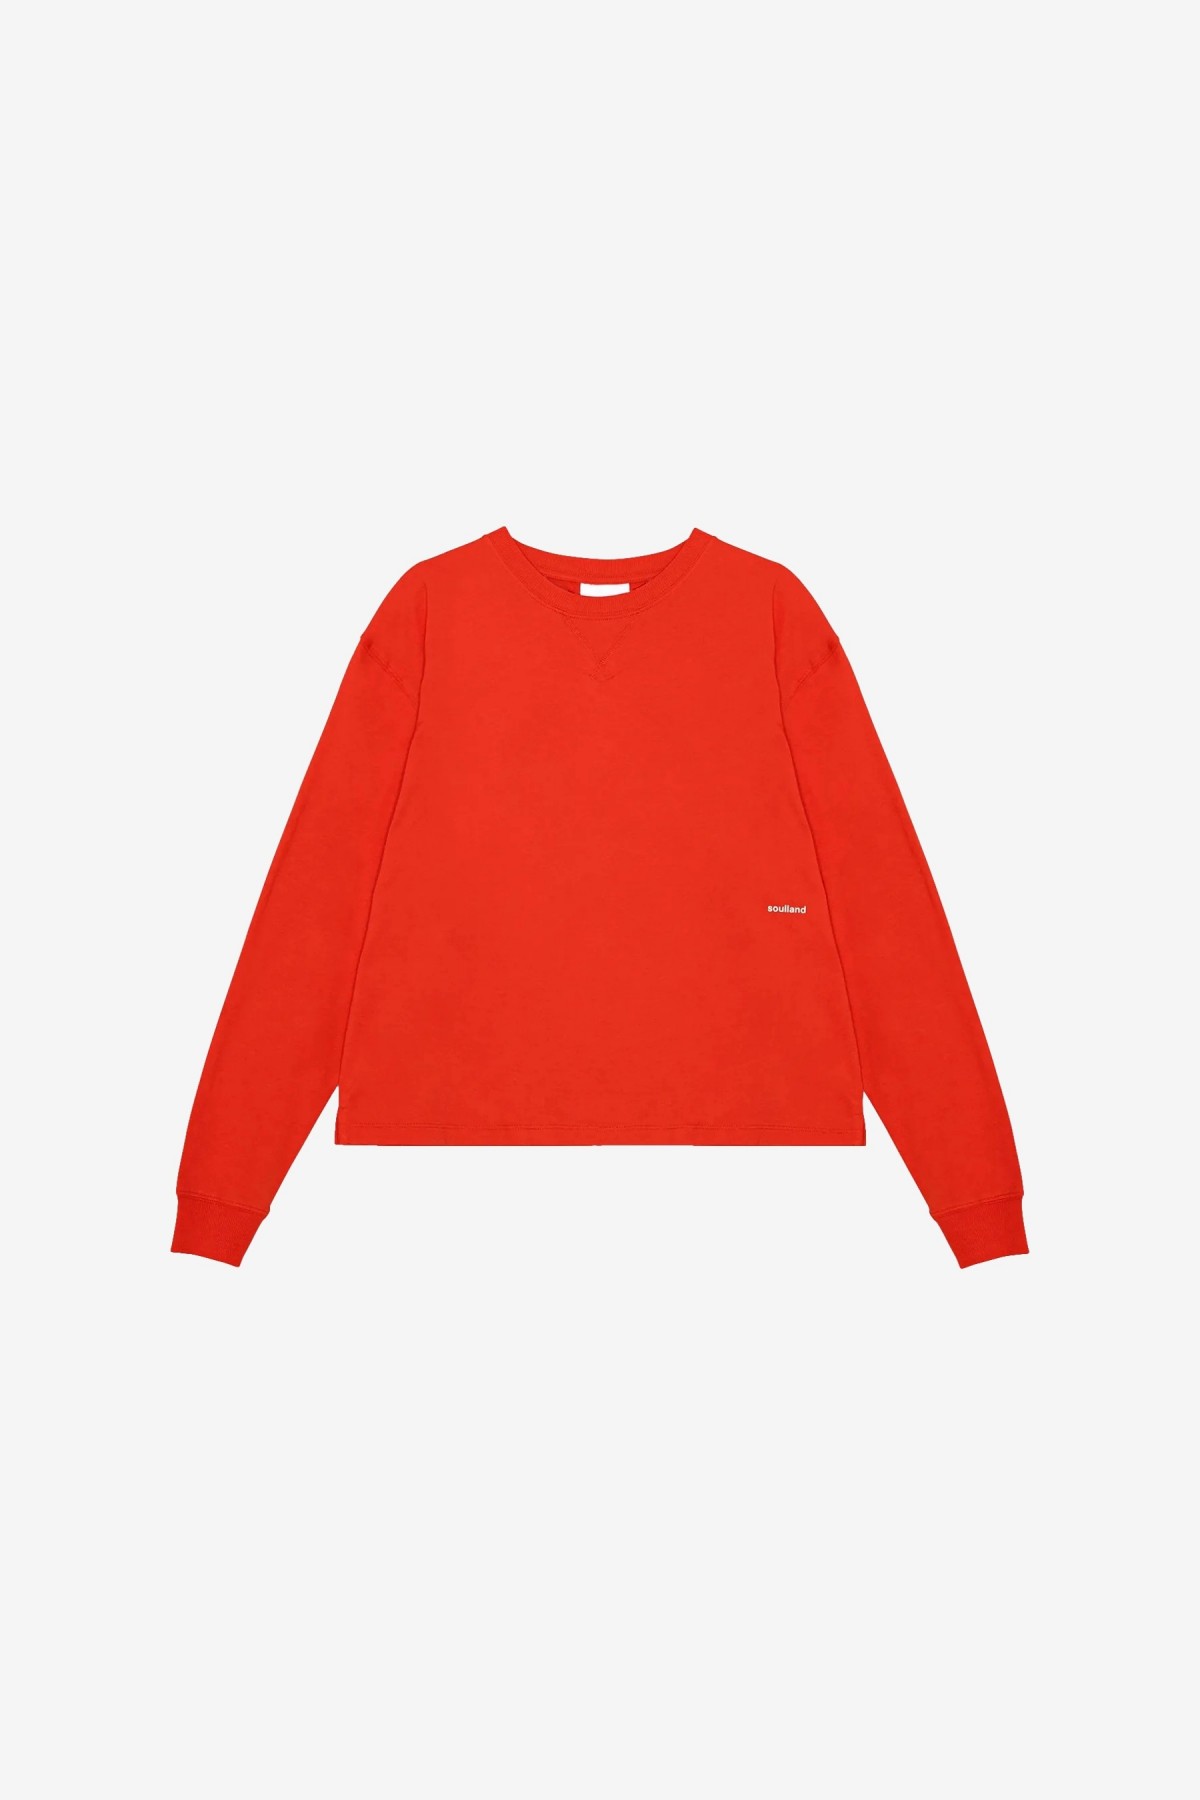 Soulland Dinah Long Sleeve T-Shirt in Red